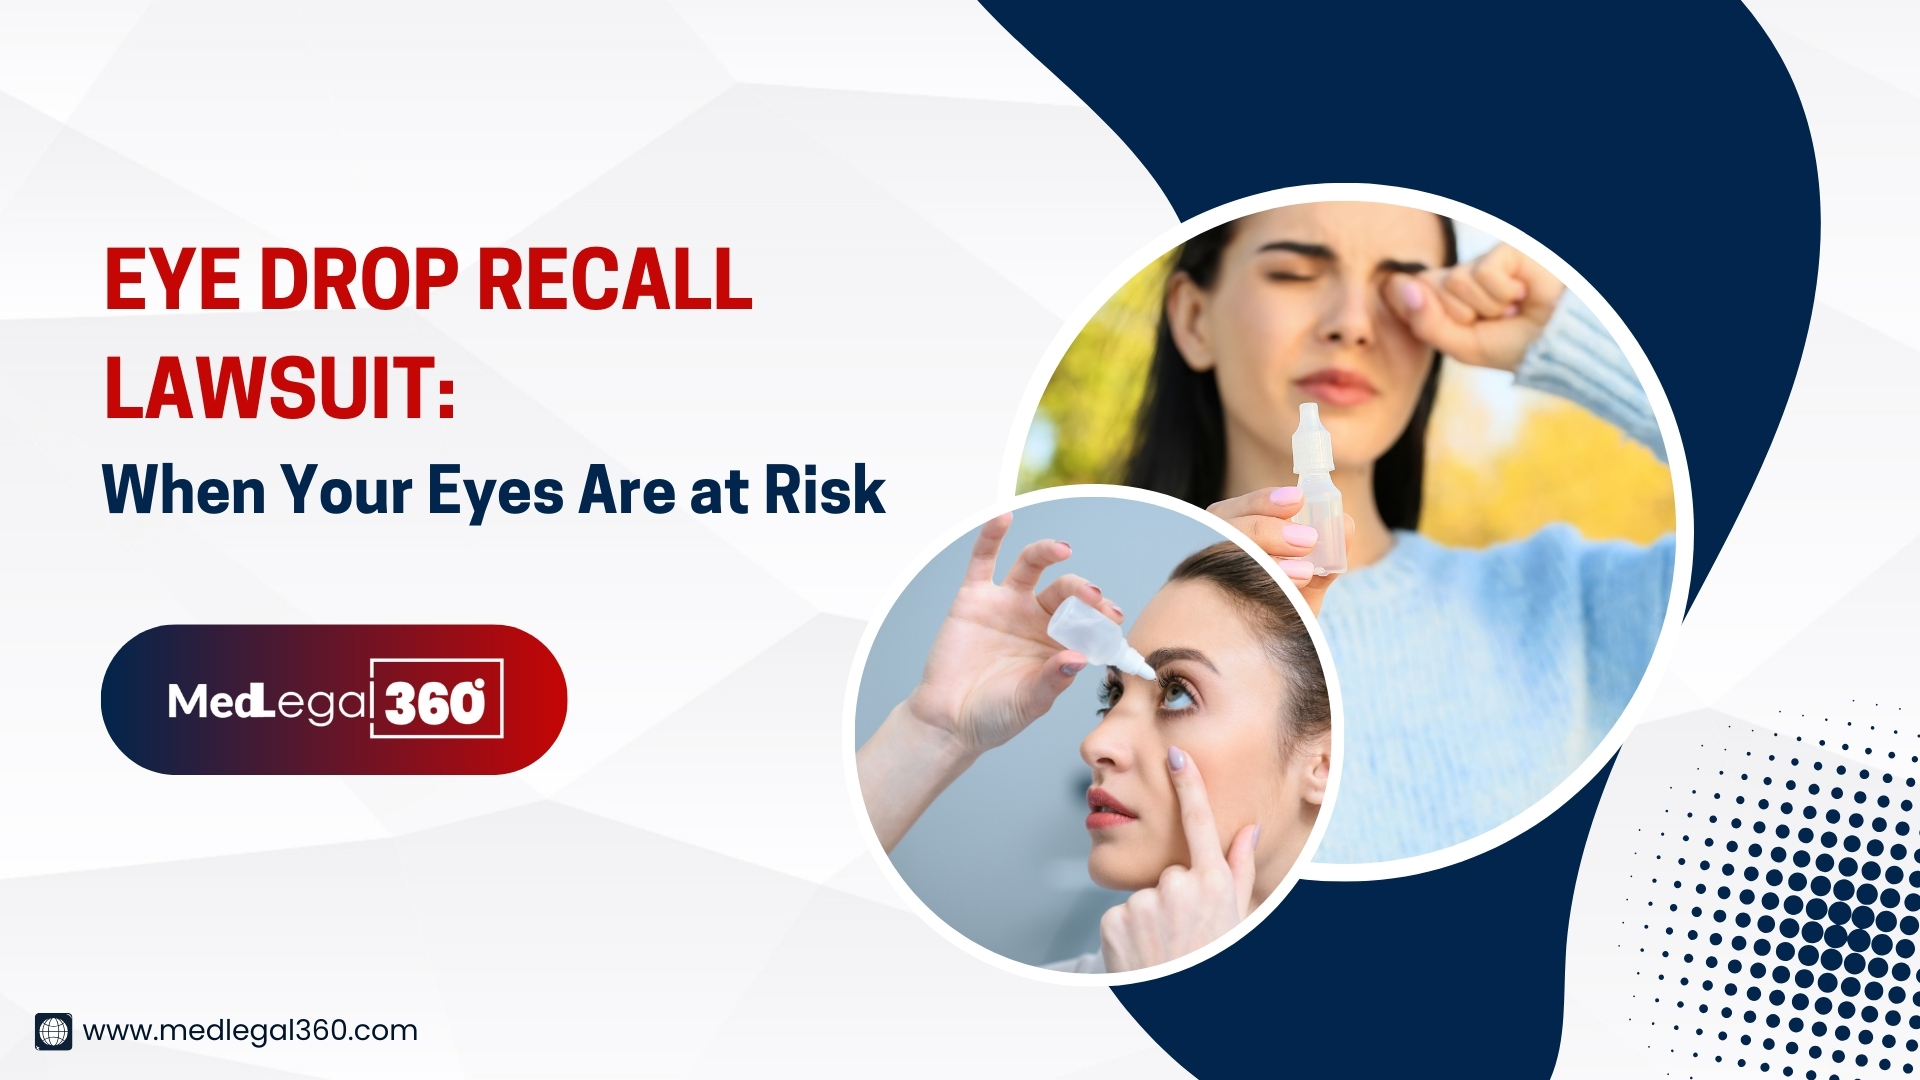 Eye Drop Recall Lawsuit: When Your Eyes Are at Risk